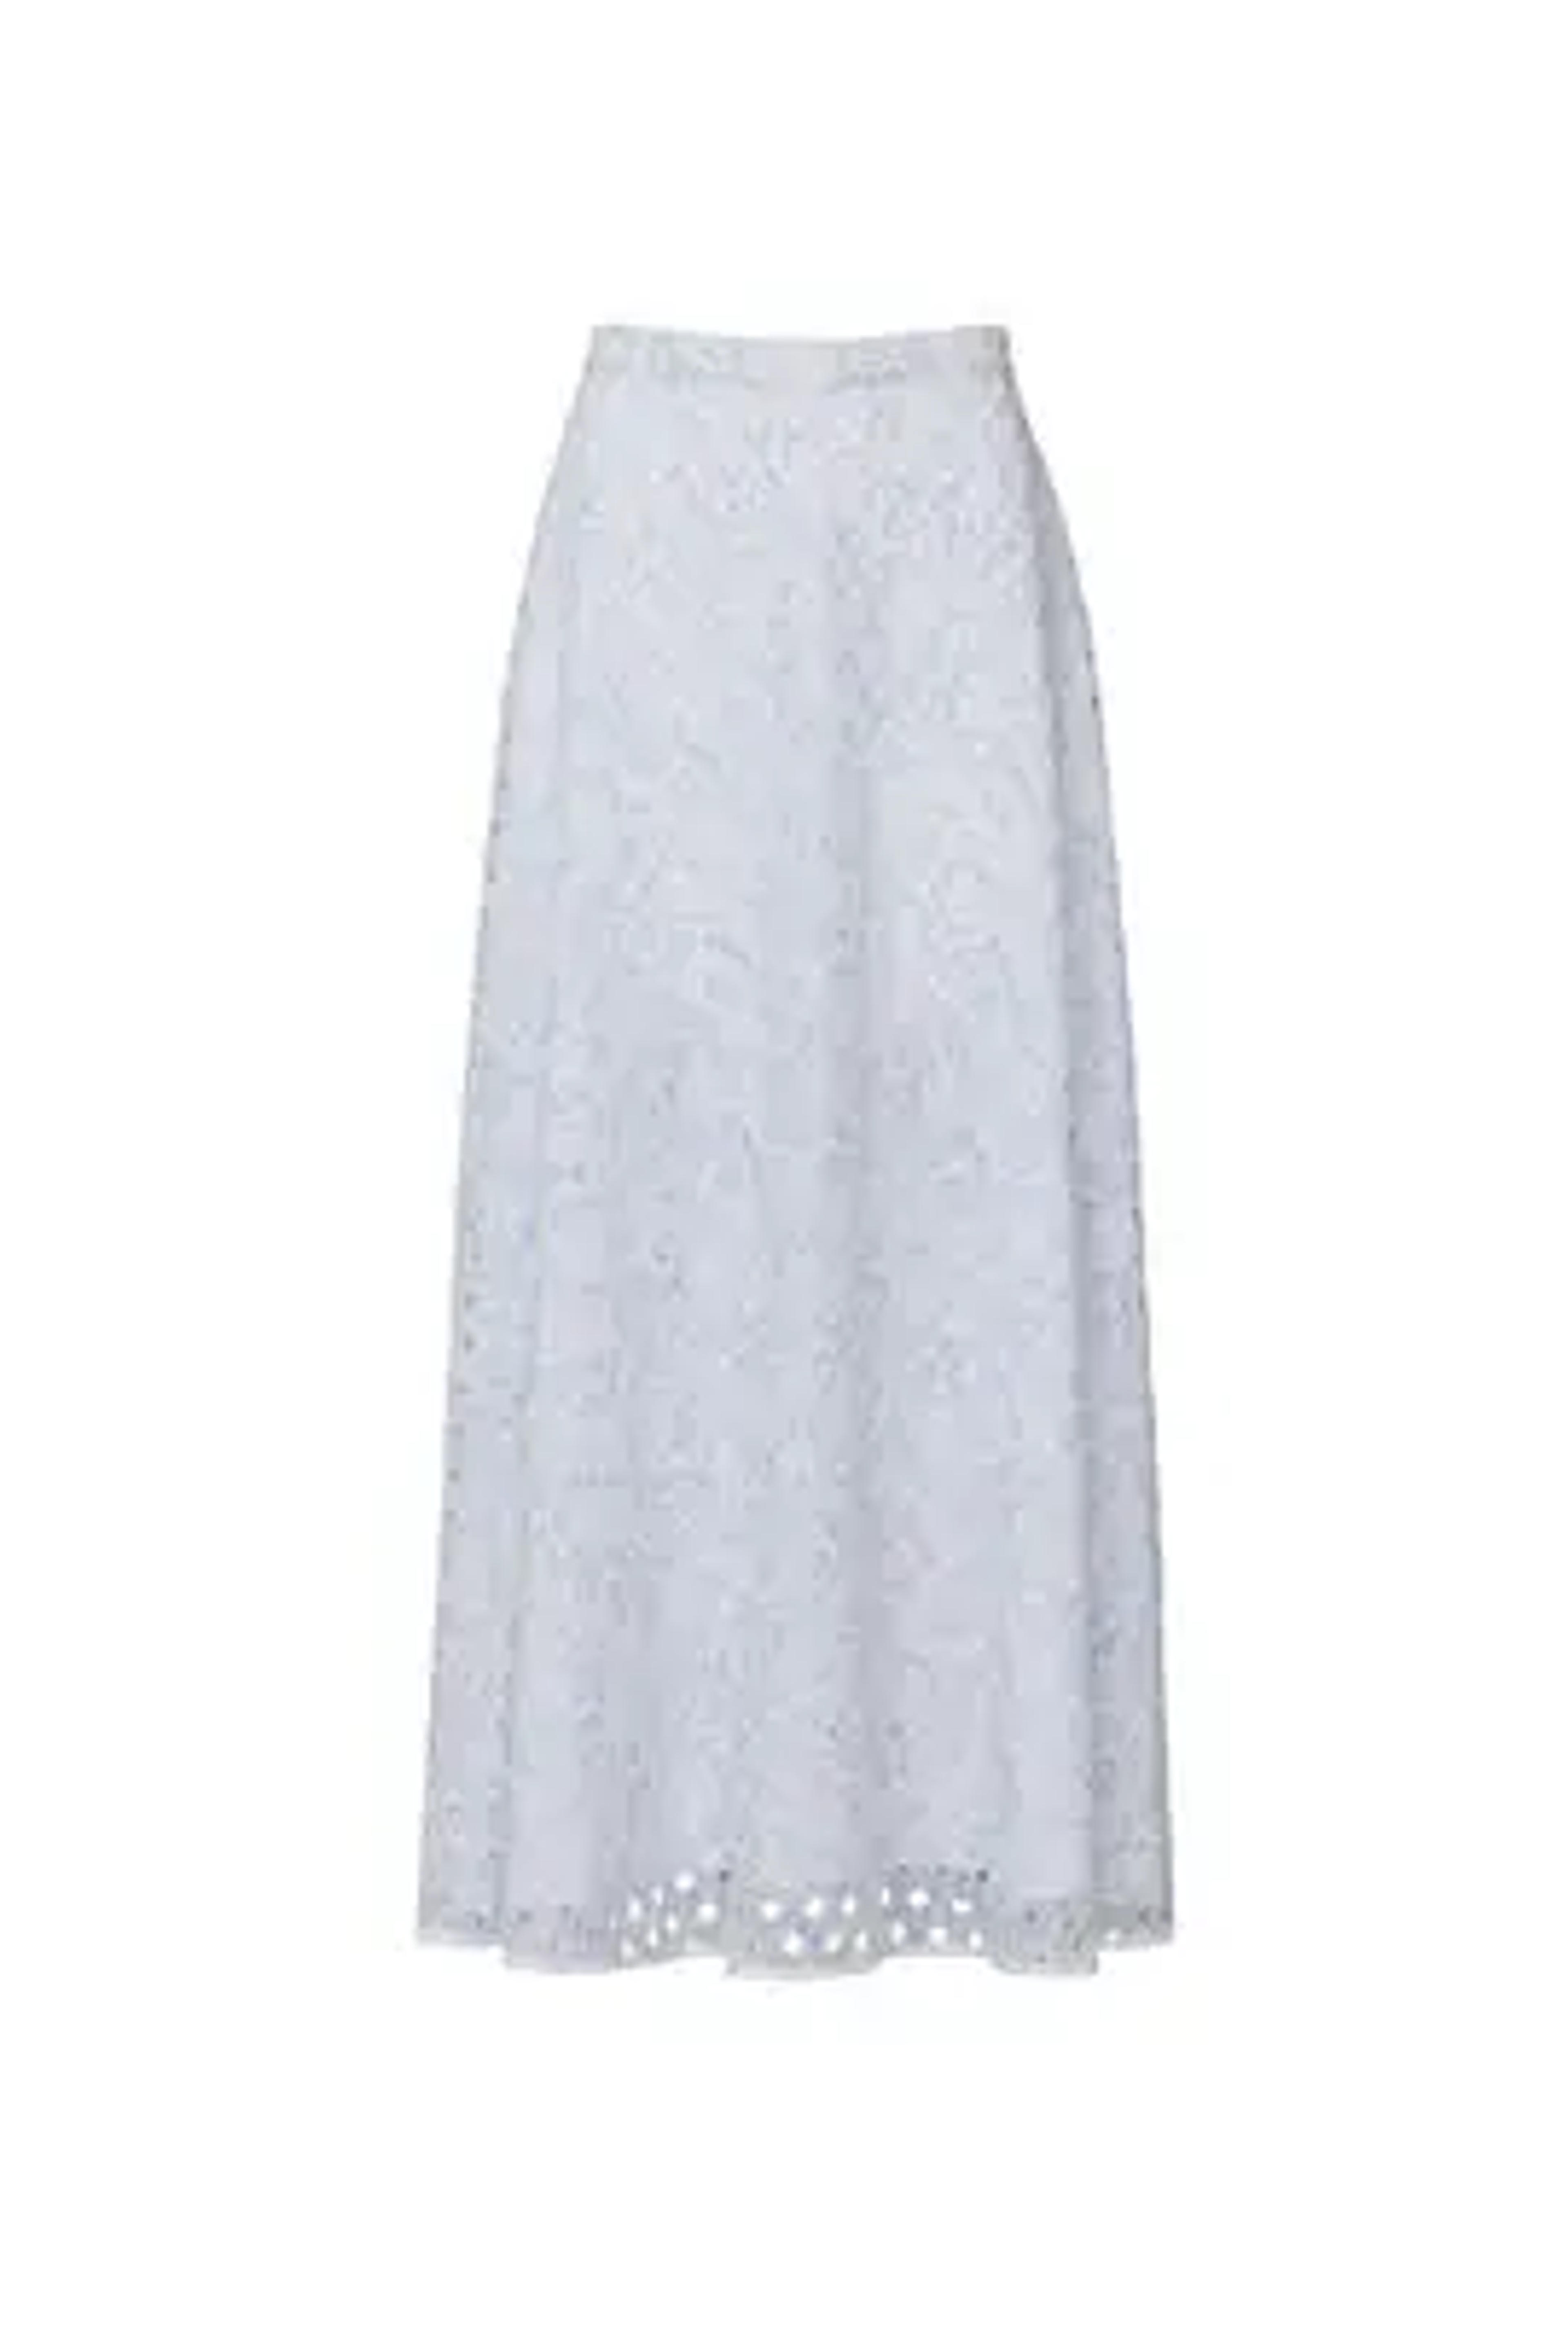 Eyelet Midi Skirt by ML Monique Lhuillier for $65 | Rent the Runway